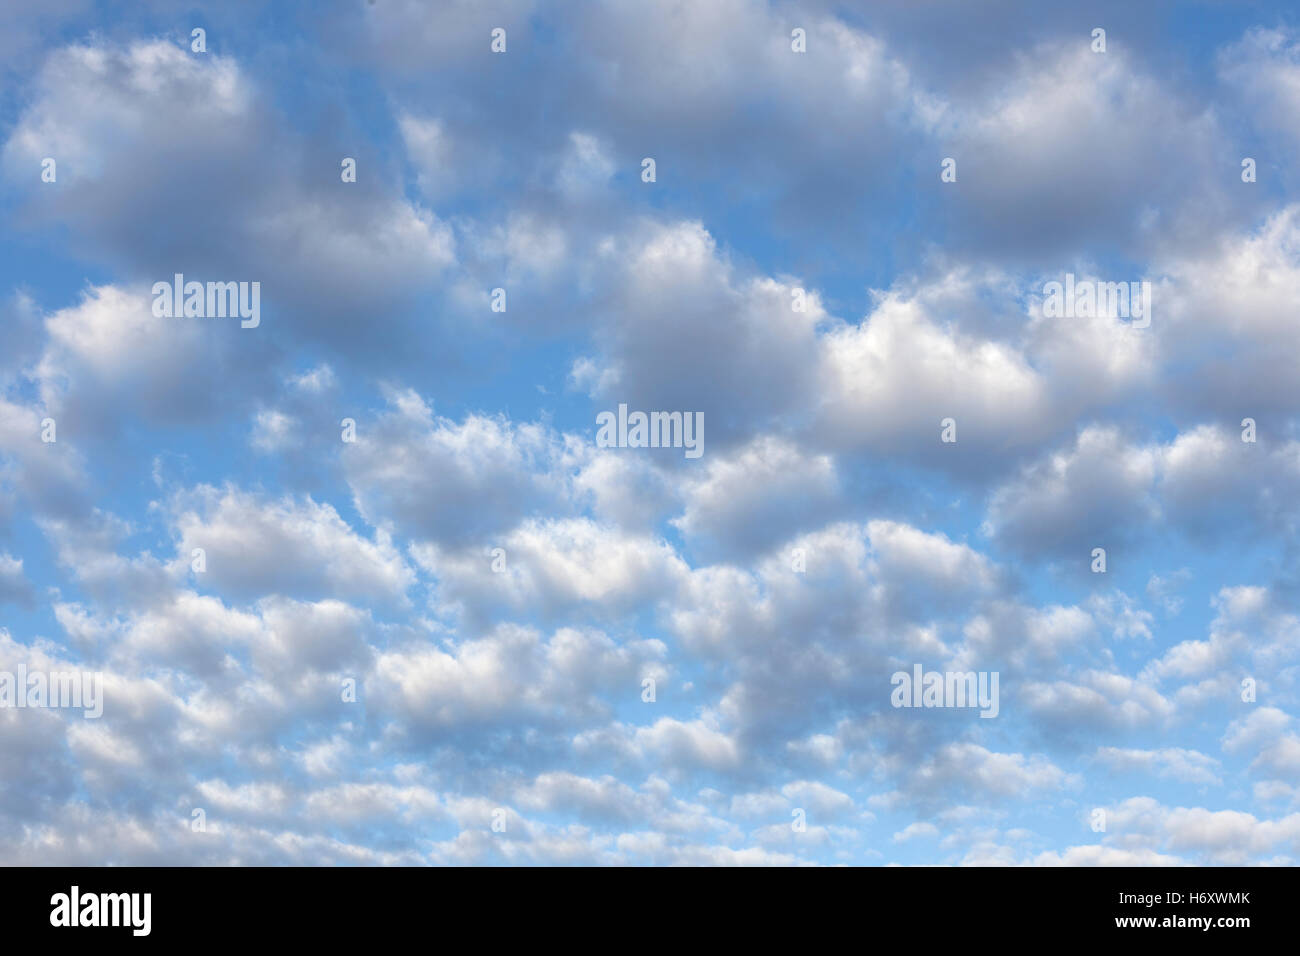 Altocumulus clouds formation. Stock Photo